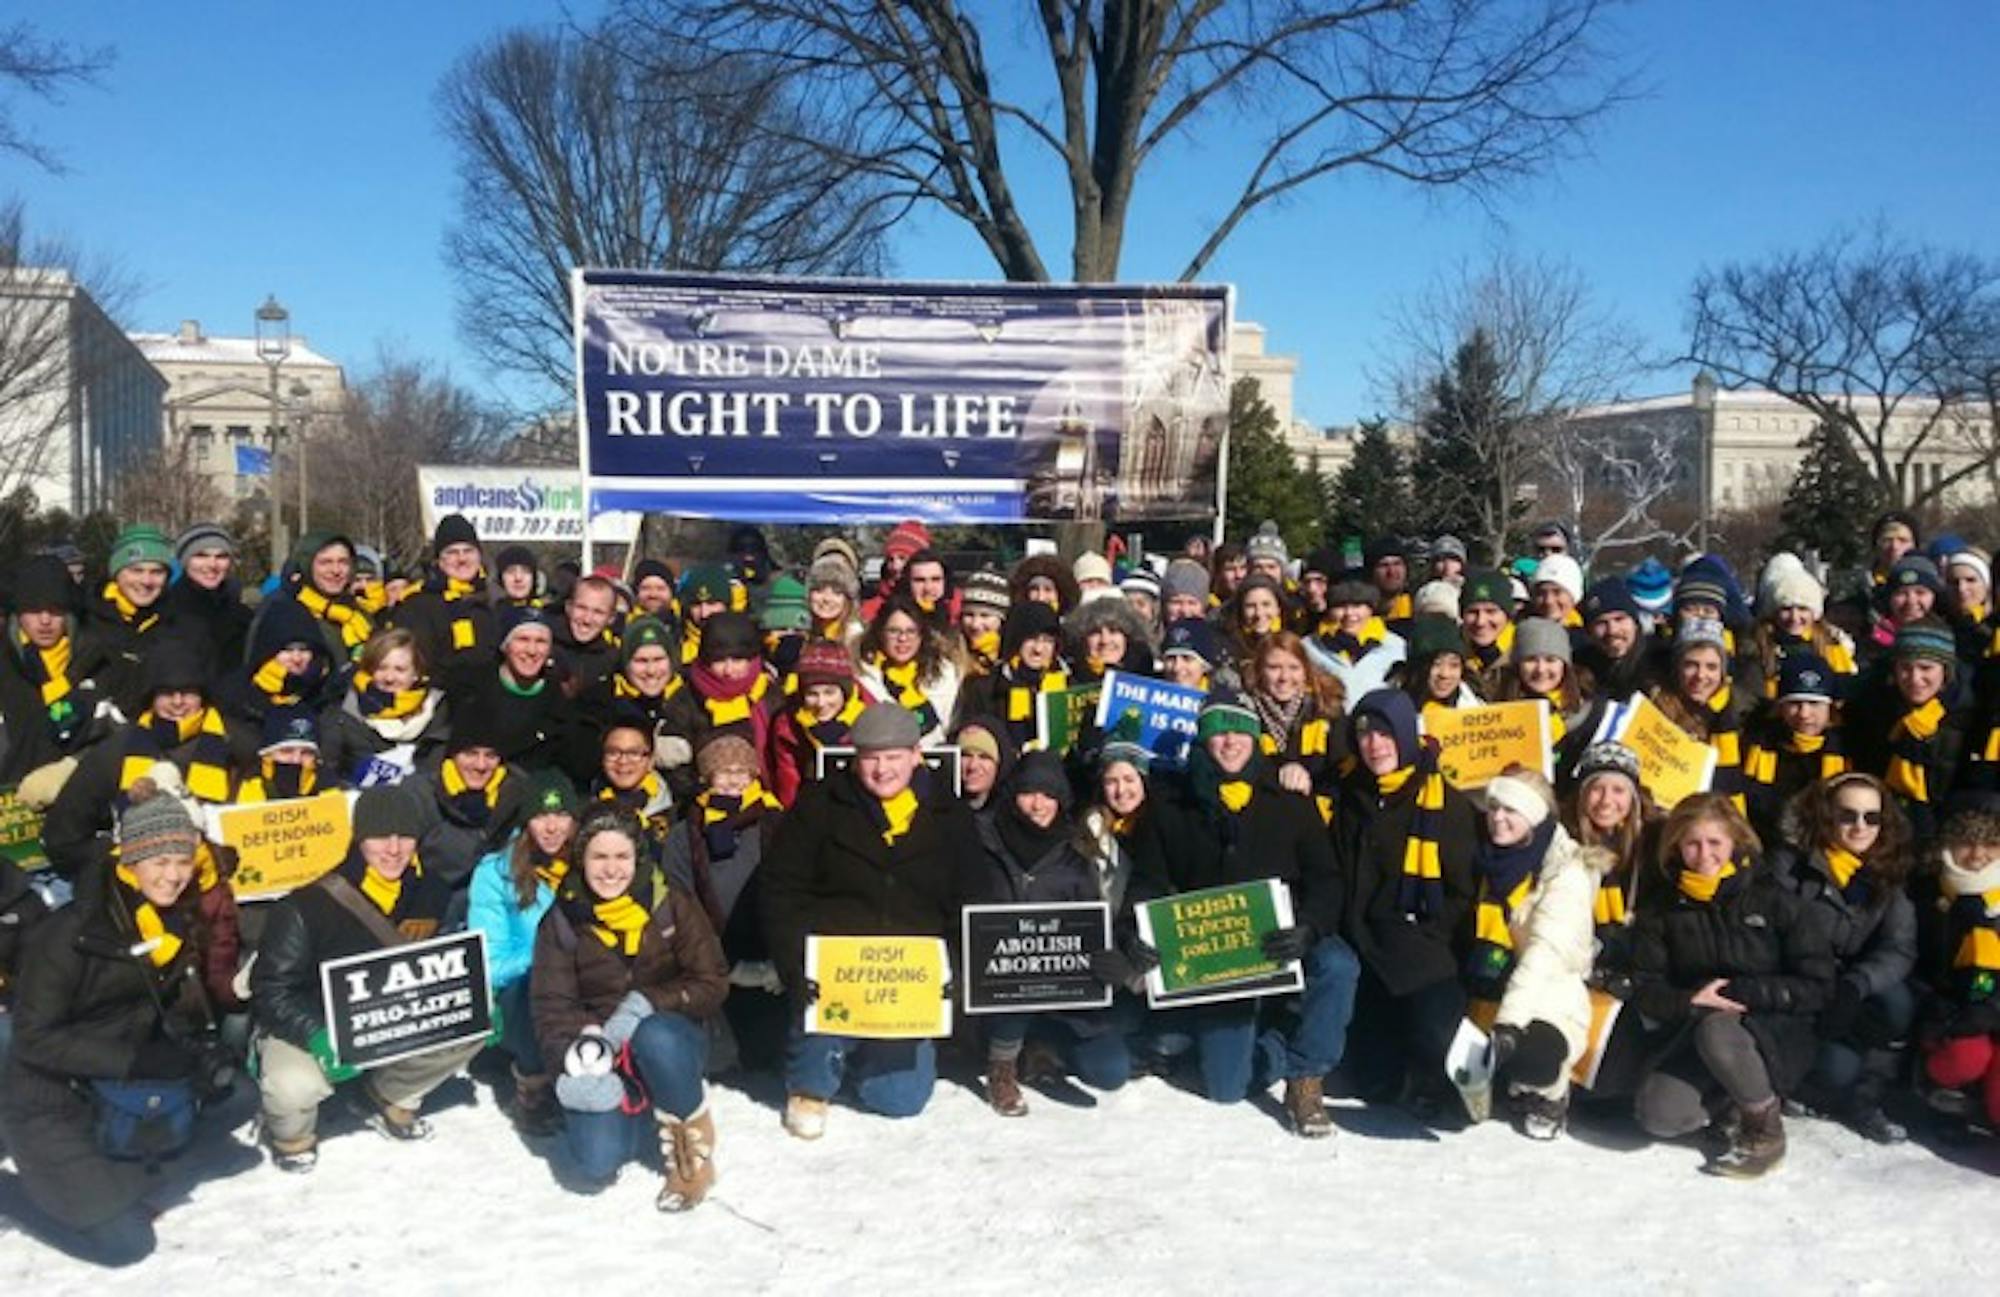 March for Life courtesy of Anna Carmack